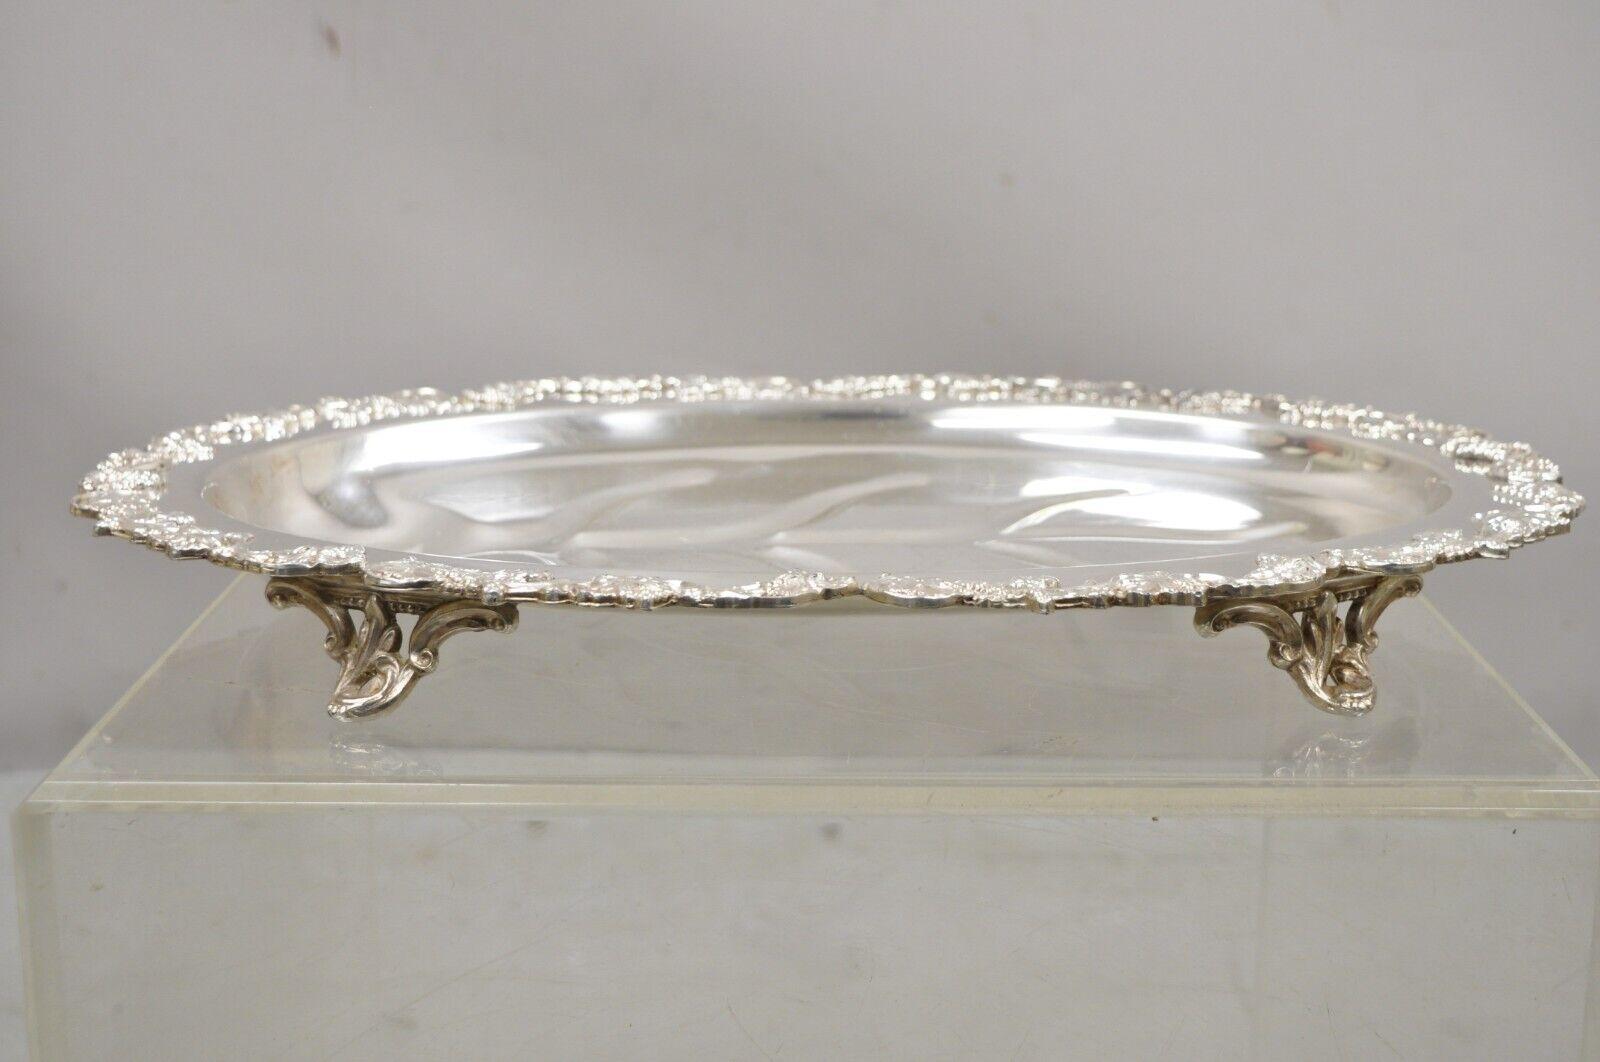 Vintage Victorian Style silver plated Oval Footed Meat Cutlery Platter tray. Item features an oval cutlery platter, marked 